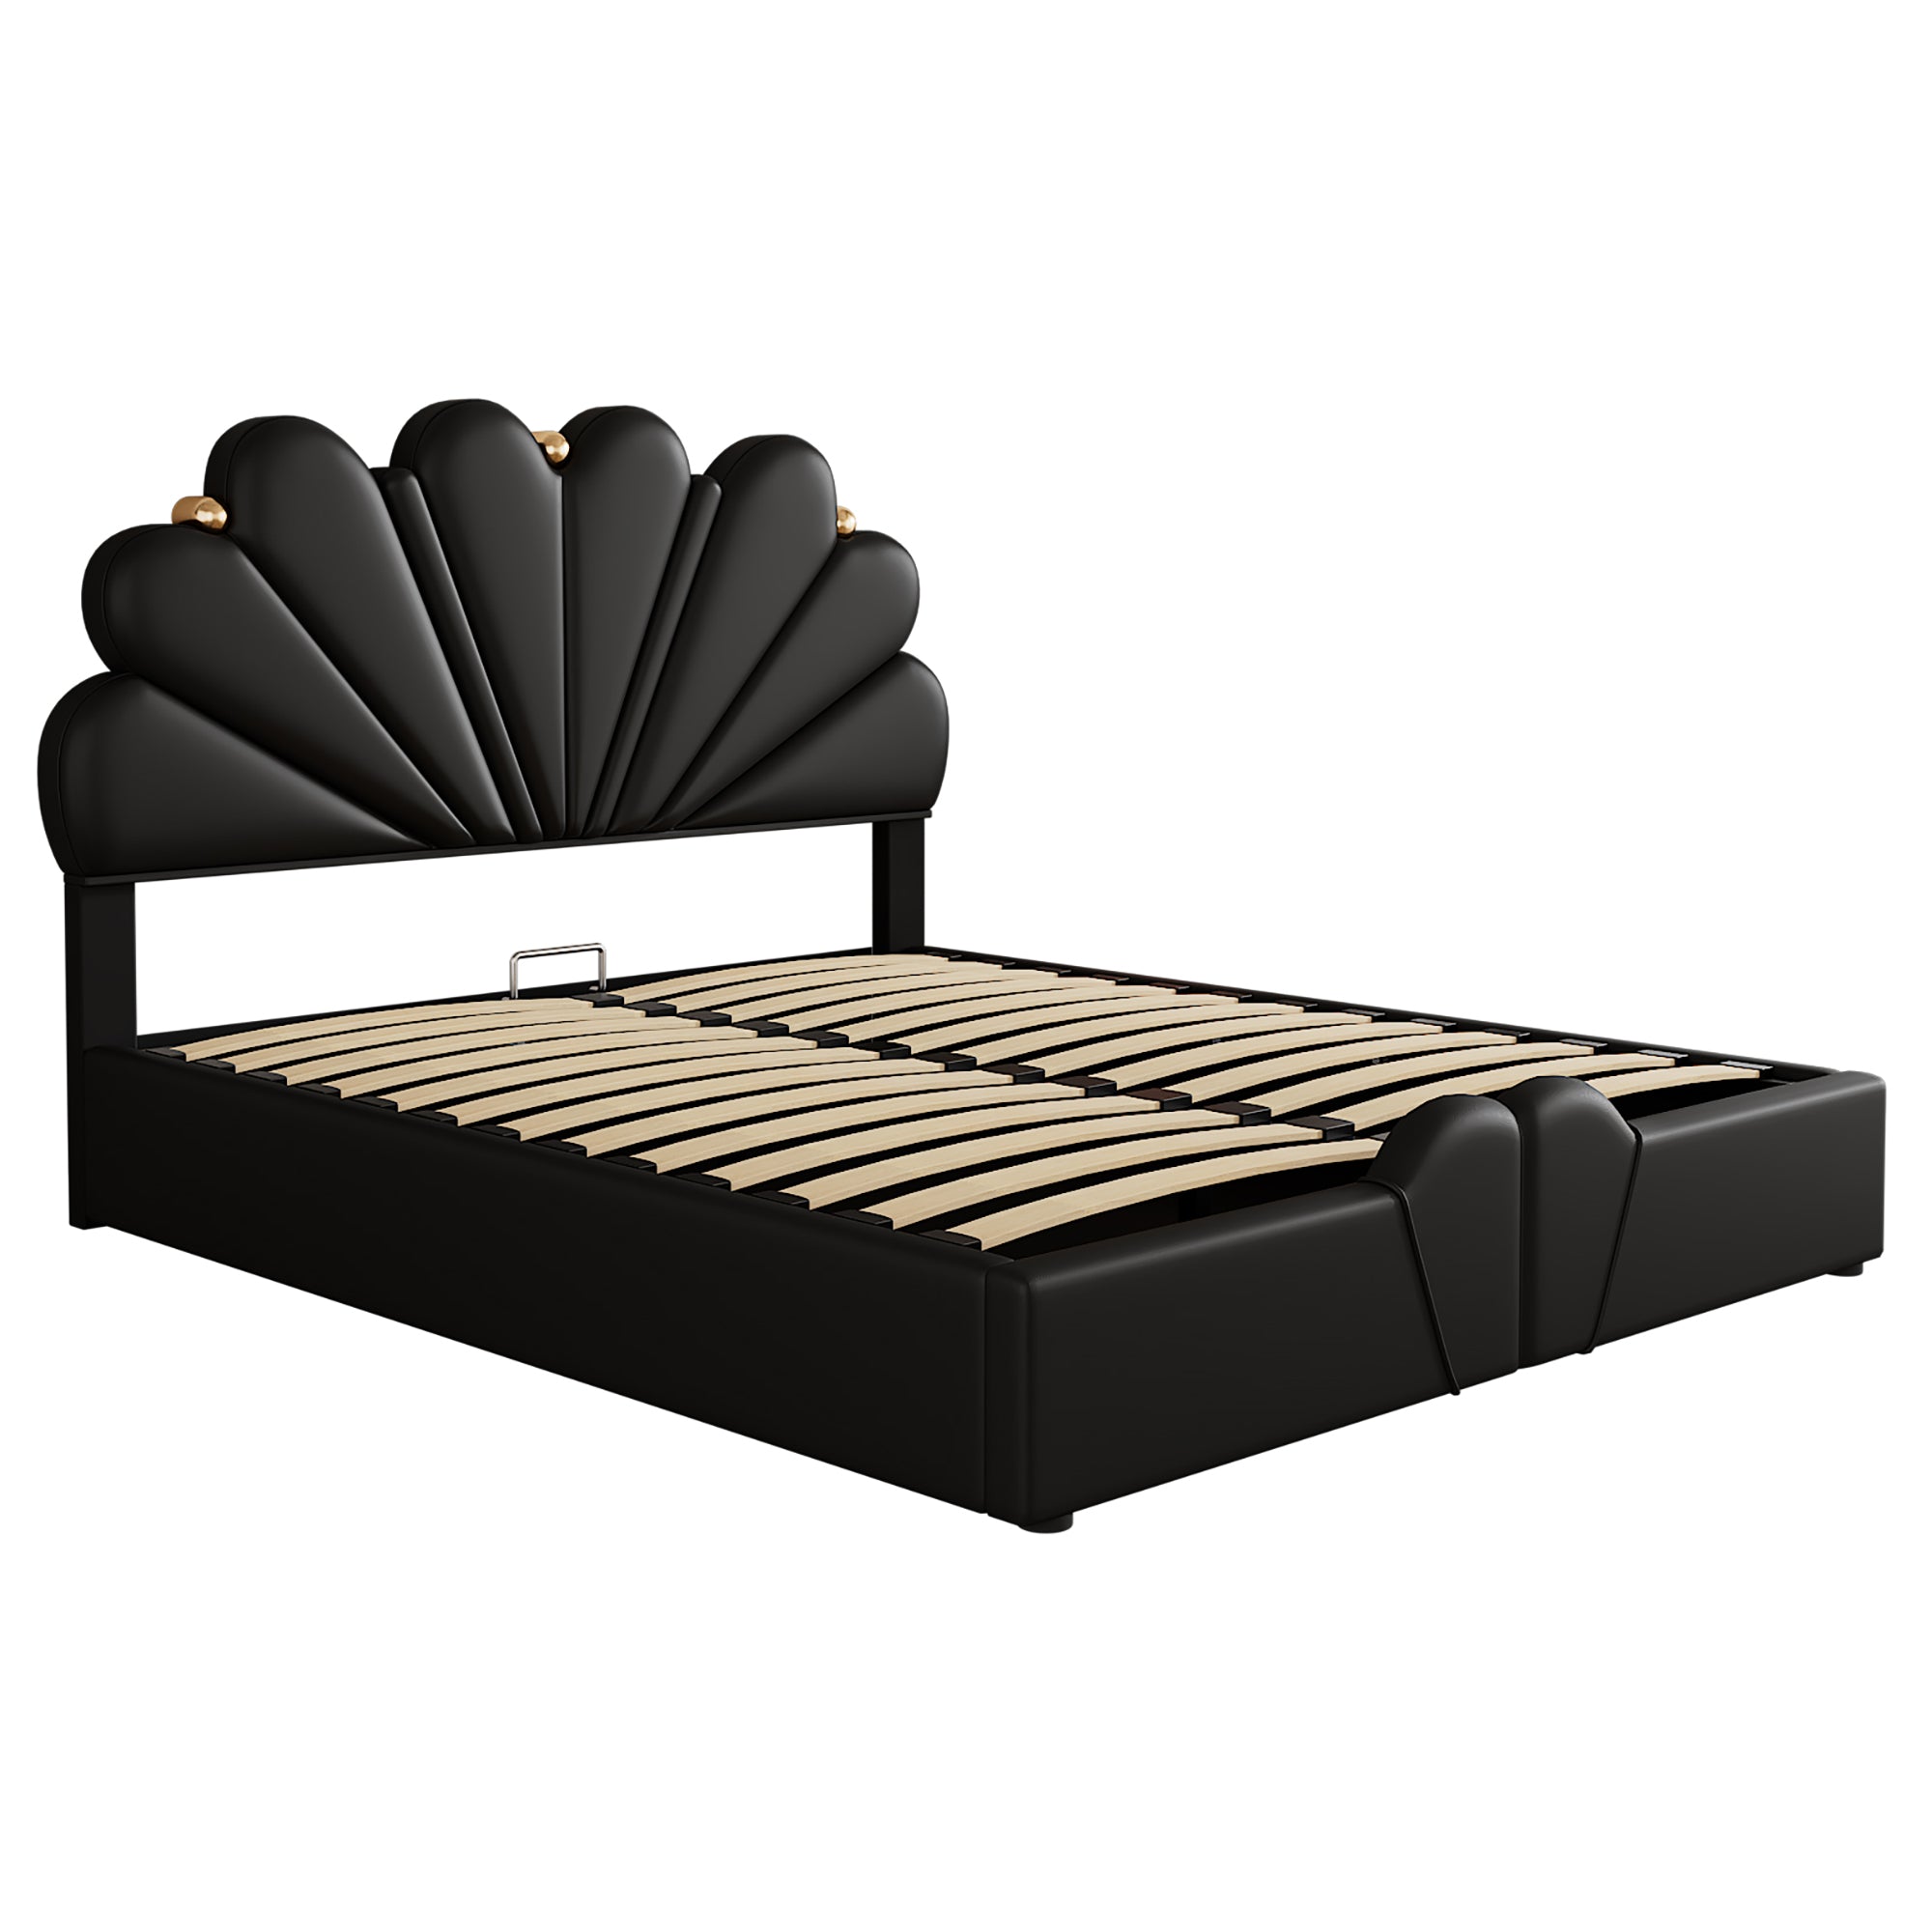 Bellemave Queen Size Upholstered Petal Shaped Platform Bed with Hydraulic Storage System